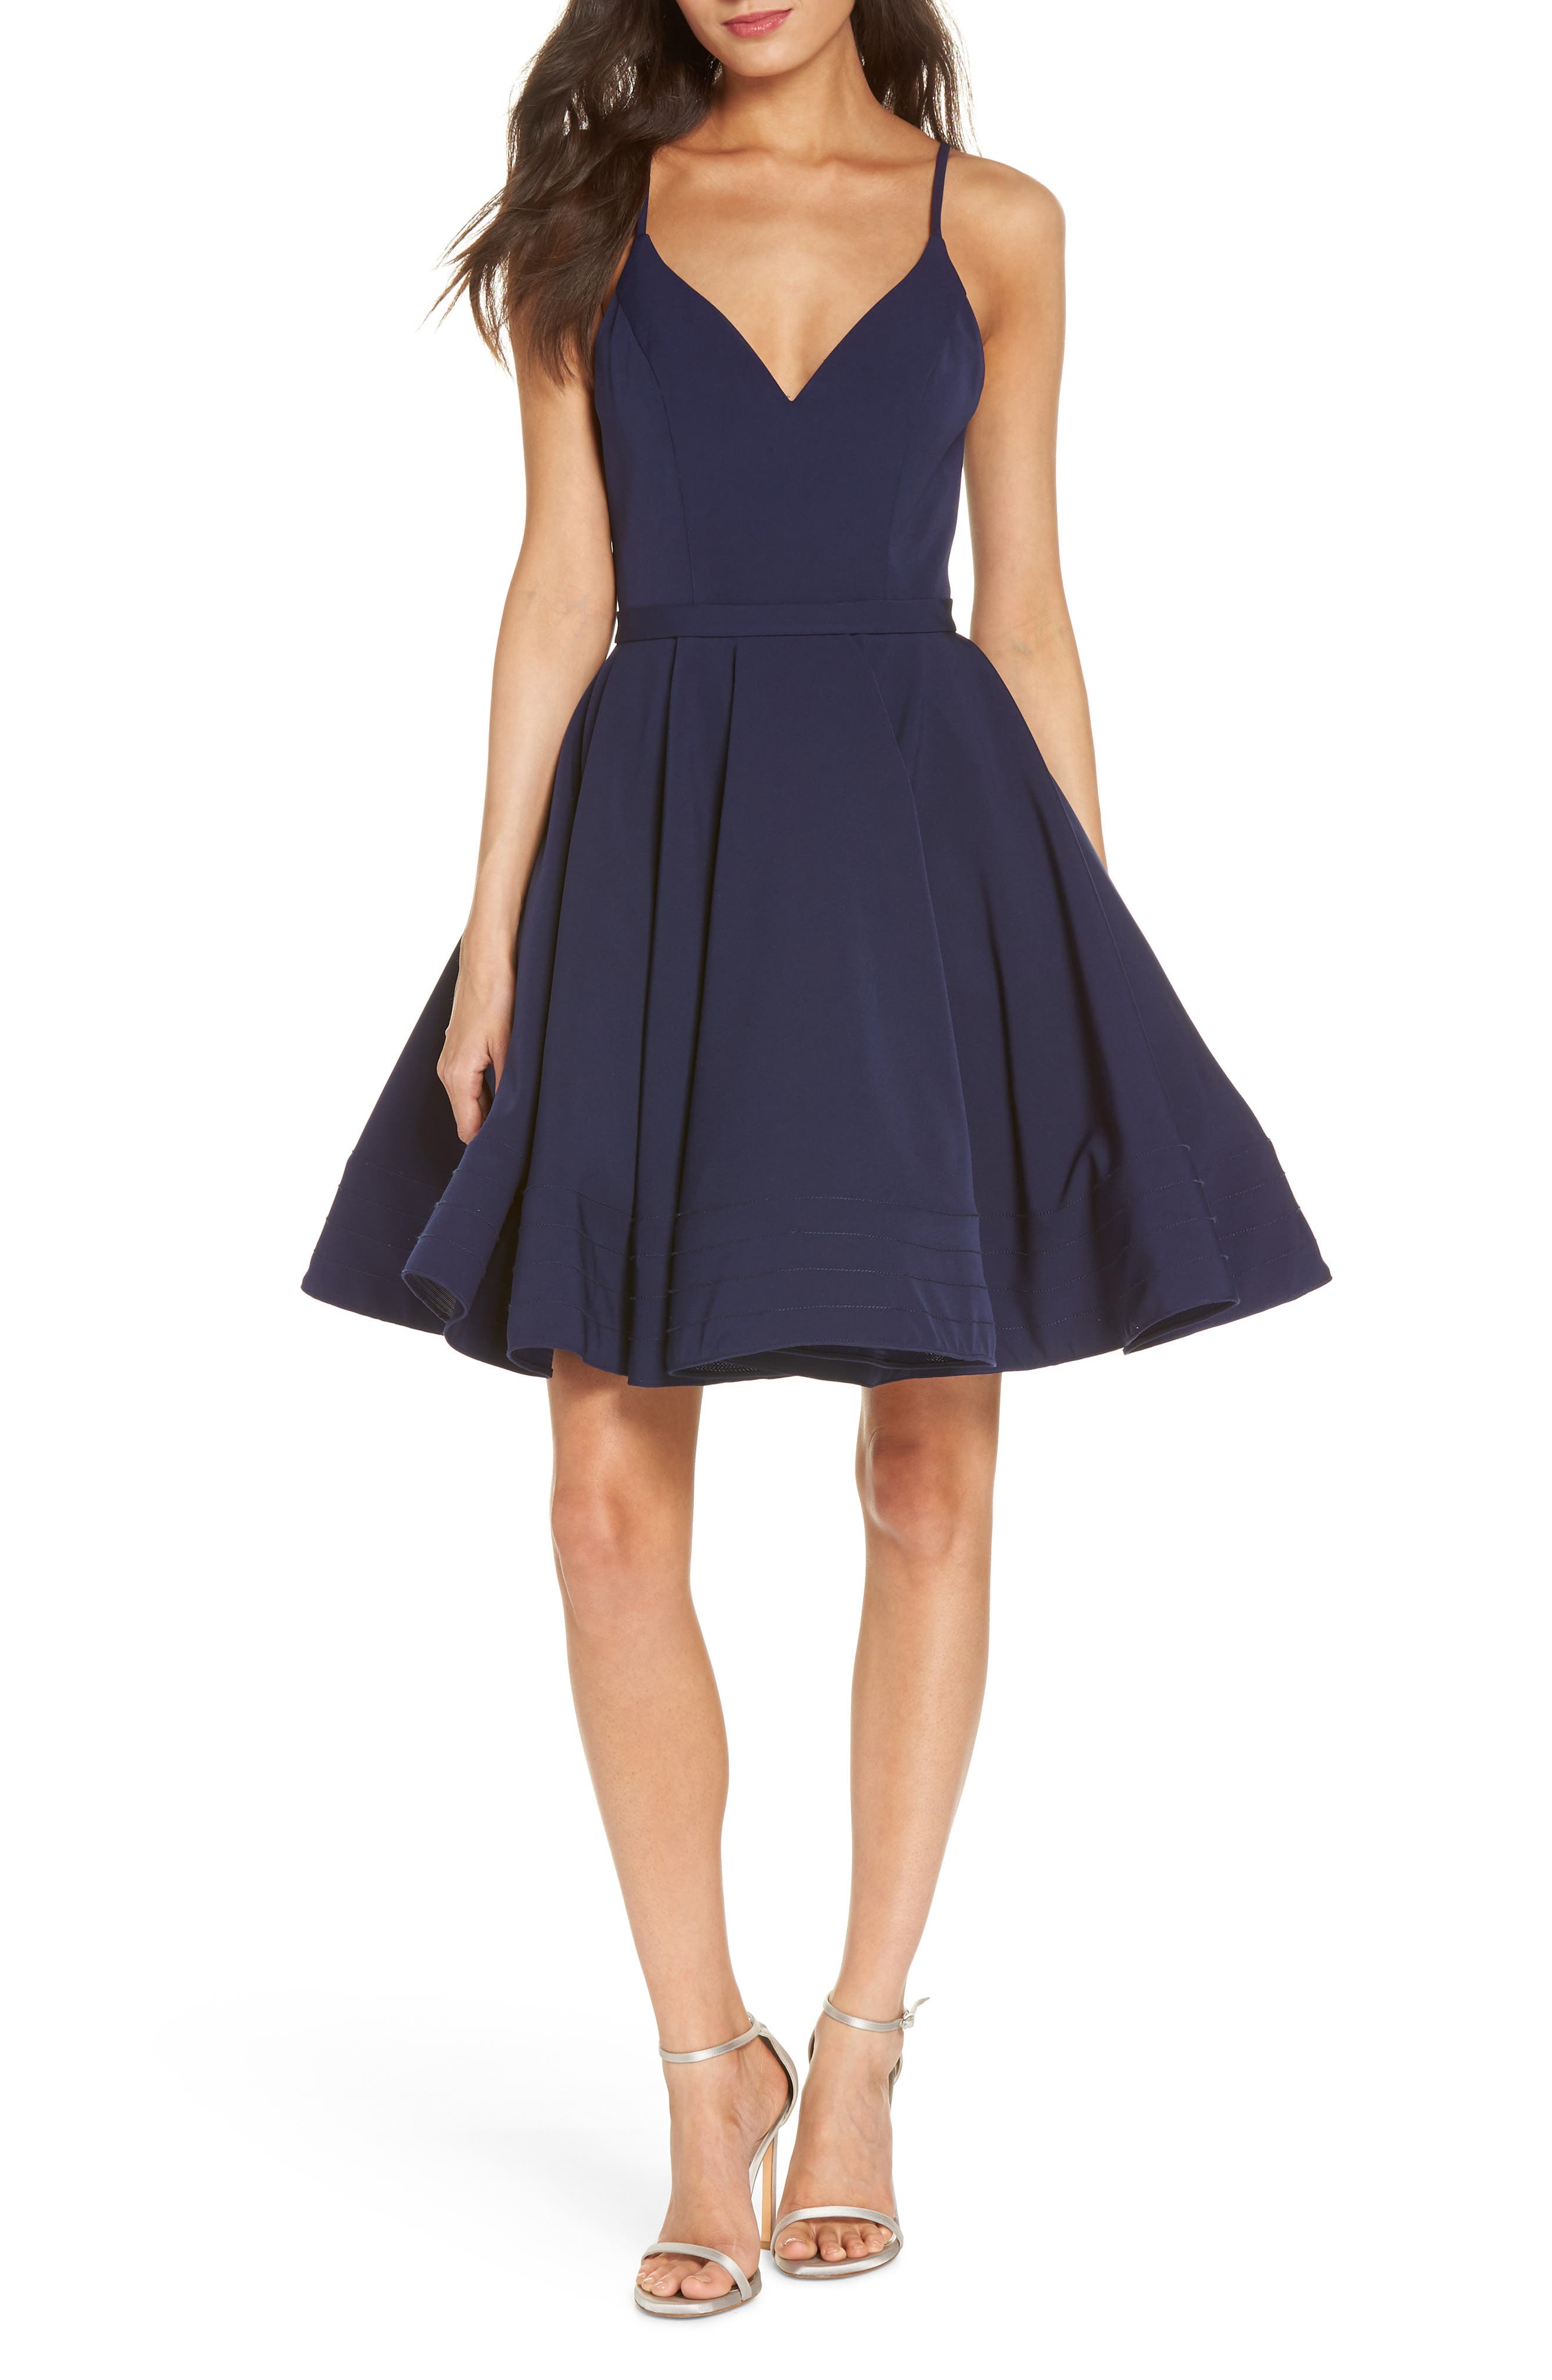 homecoming dresses 2019 nordstrom